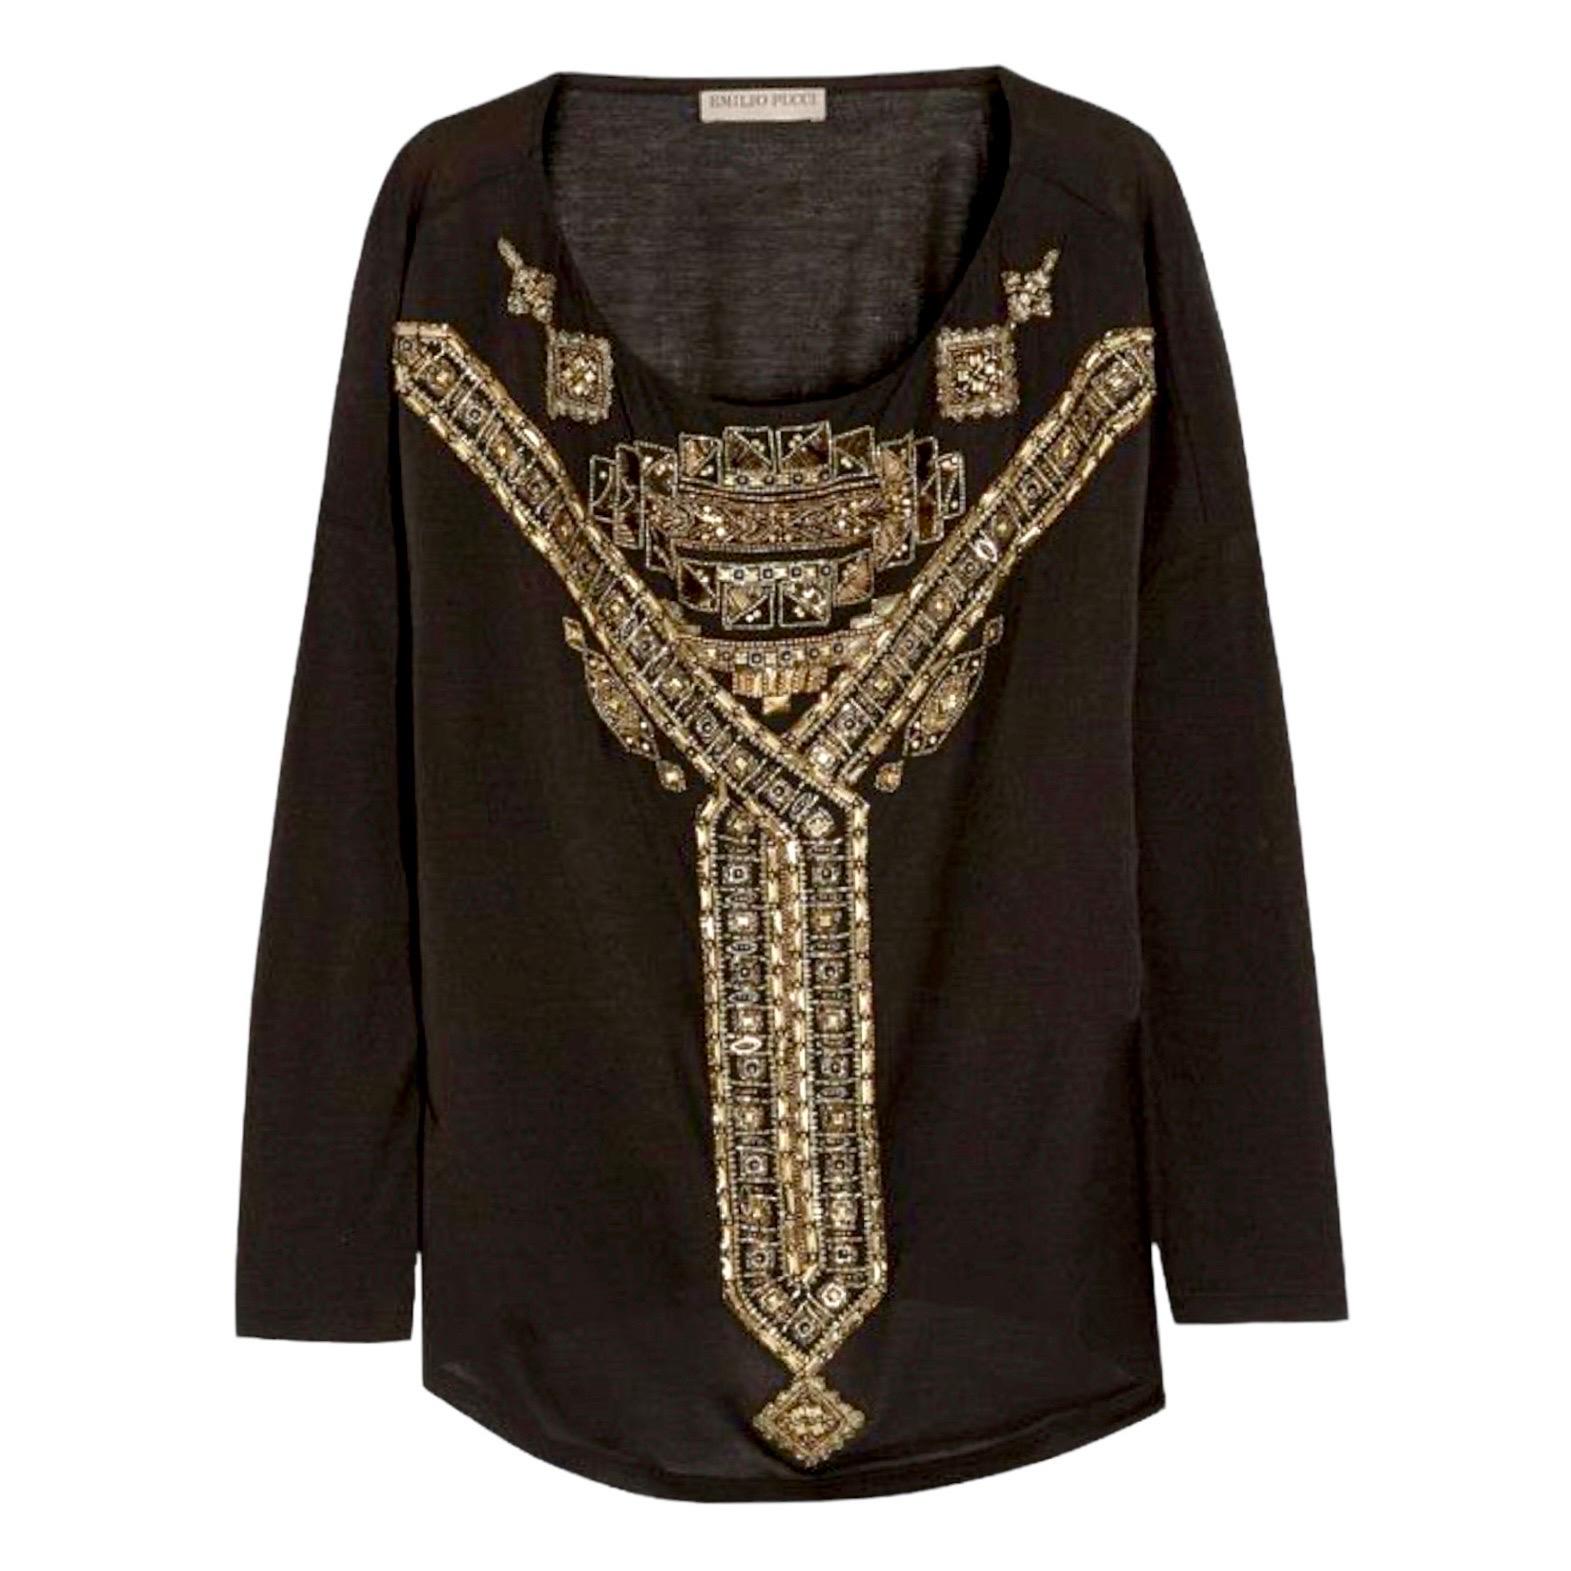 EMILIO PUCCI Black Embroidered Silk Blend Longsleeve Top Shirt 42 In Good Condition For Sale In Switzerland, CH